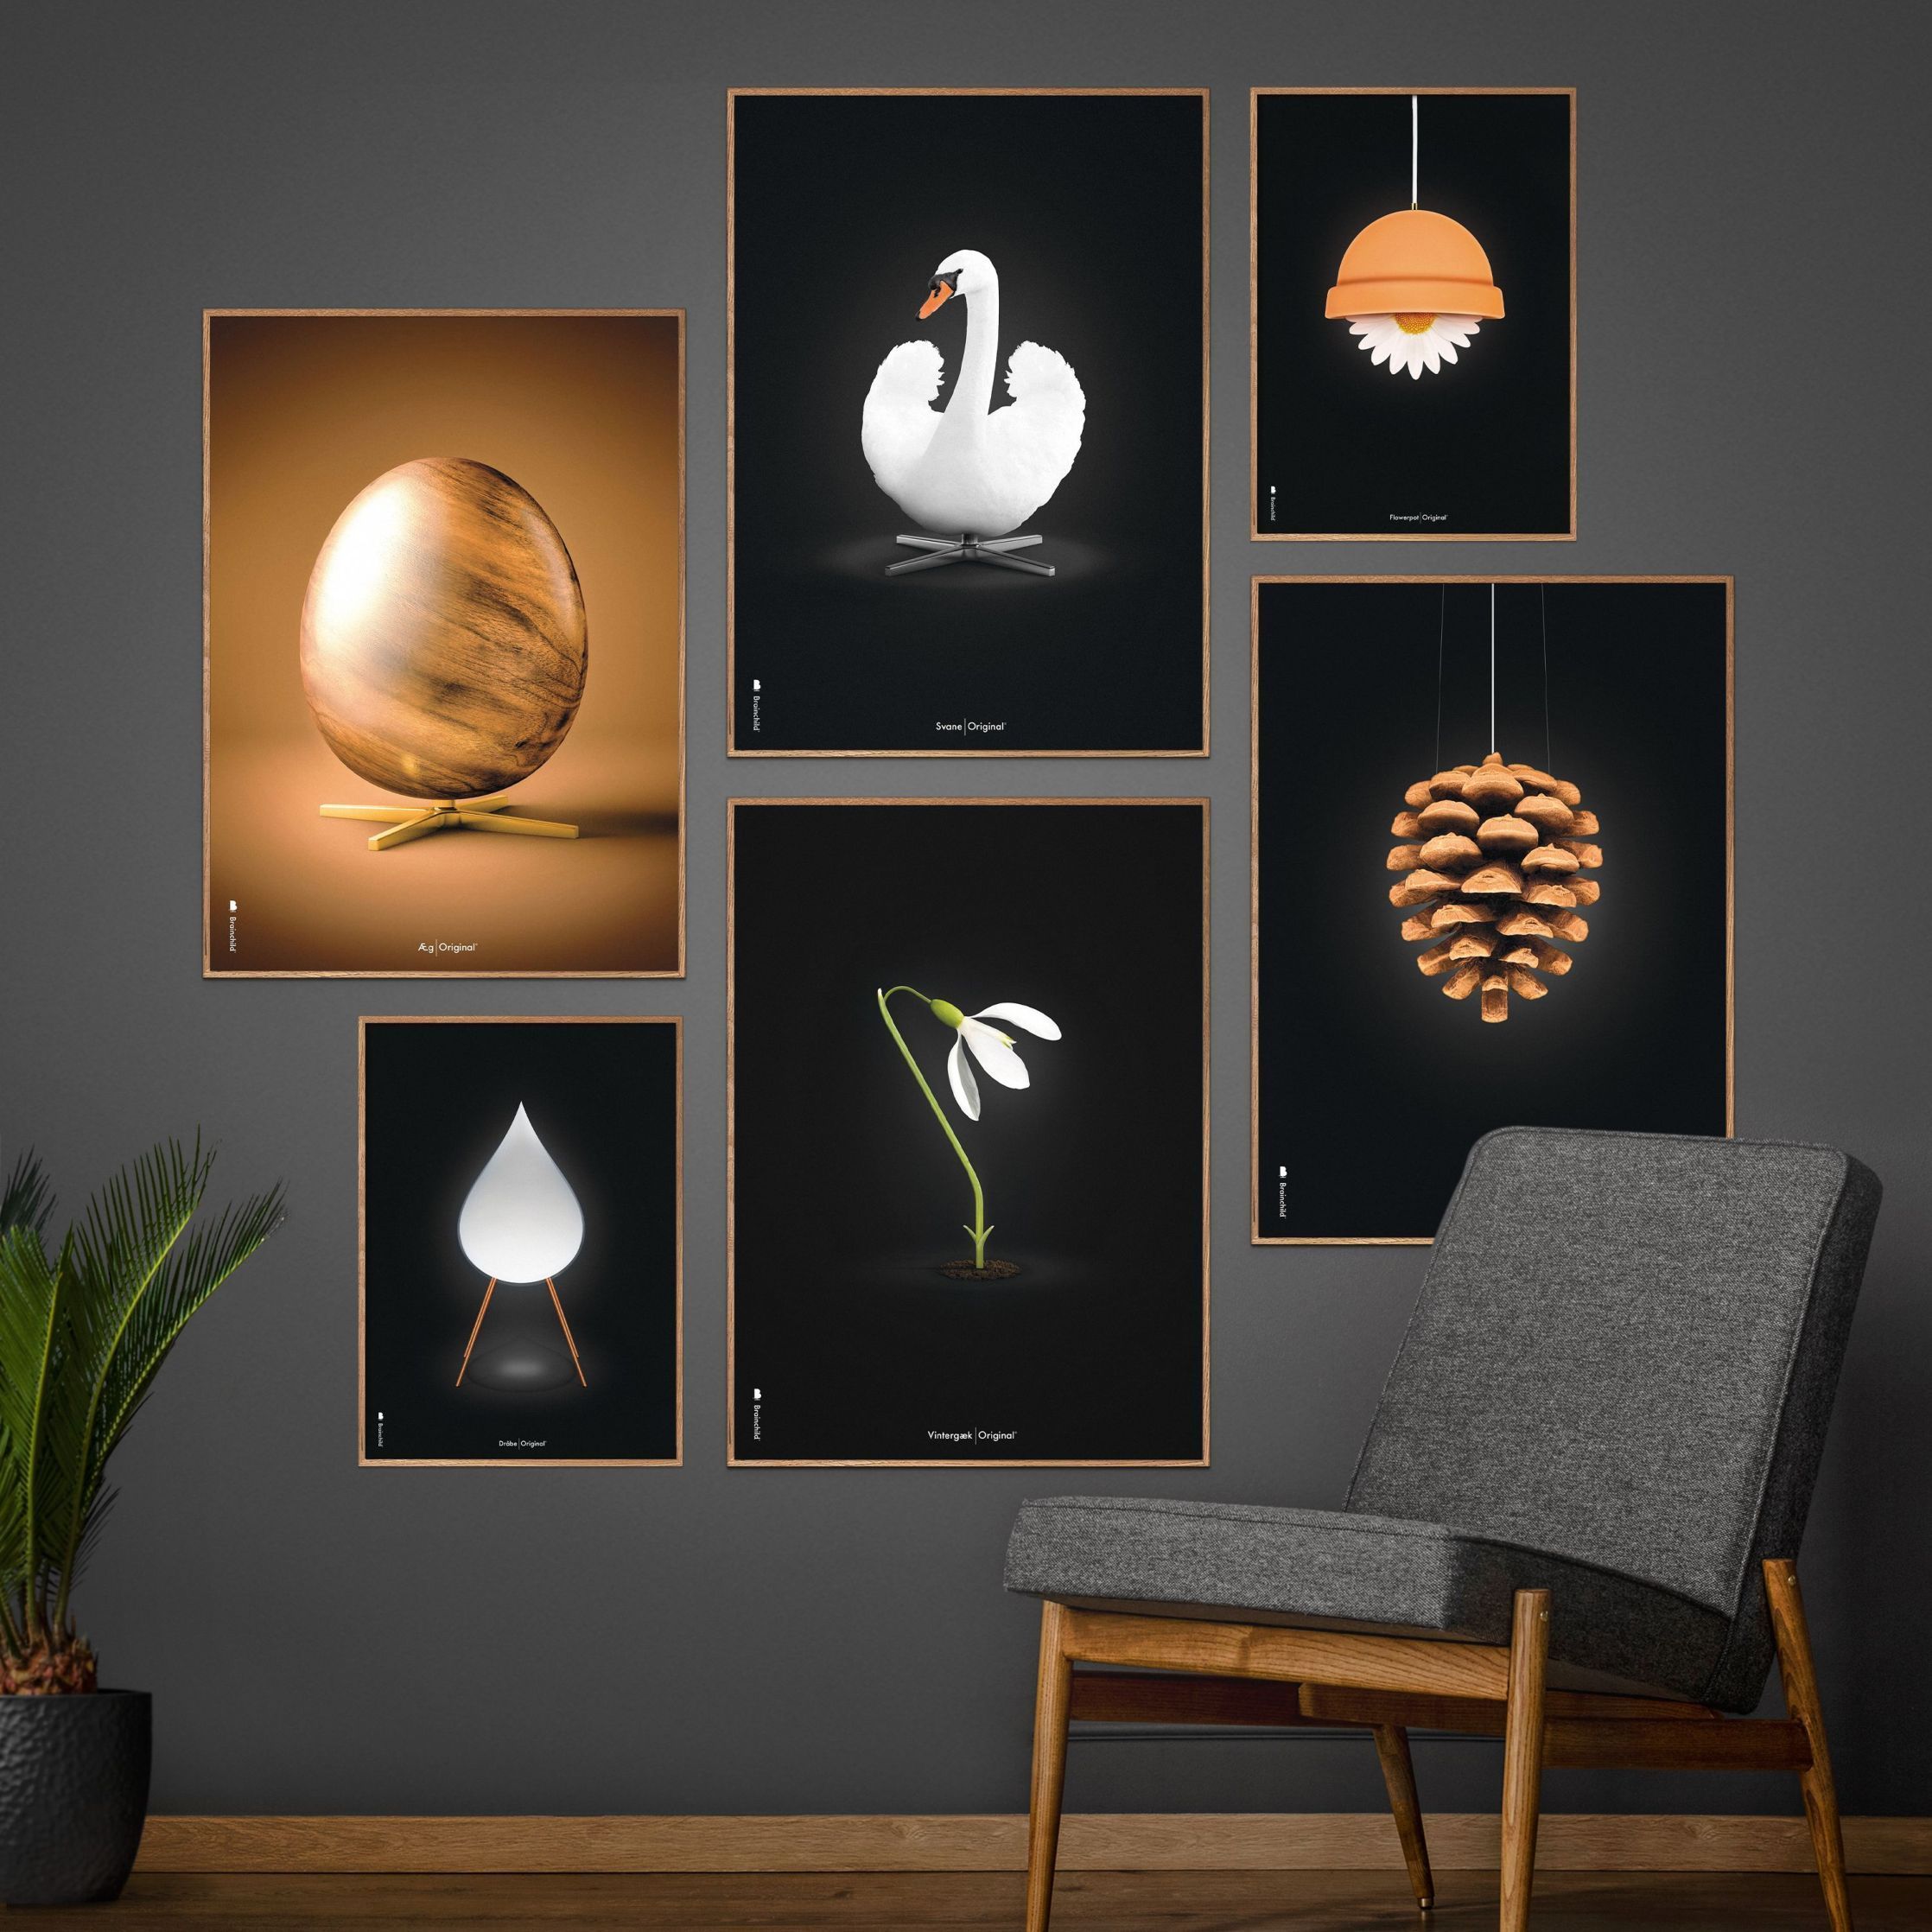 Brainchild Pine Cone Classic Poster, Frame Made Of Light Wood A5, Black Background